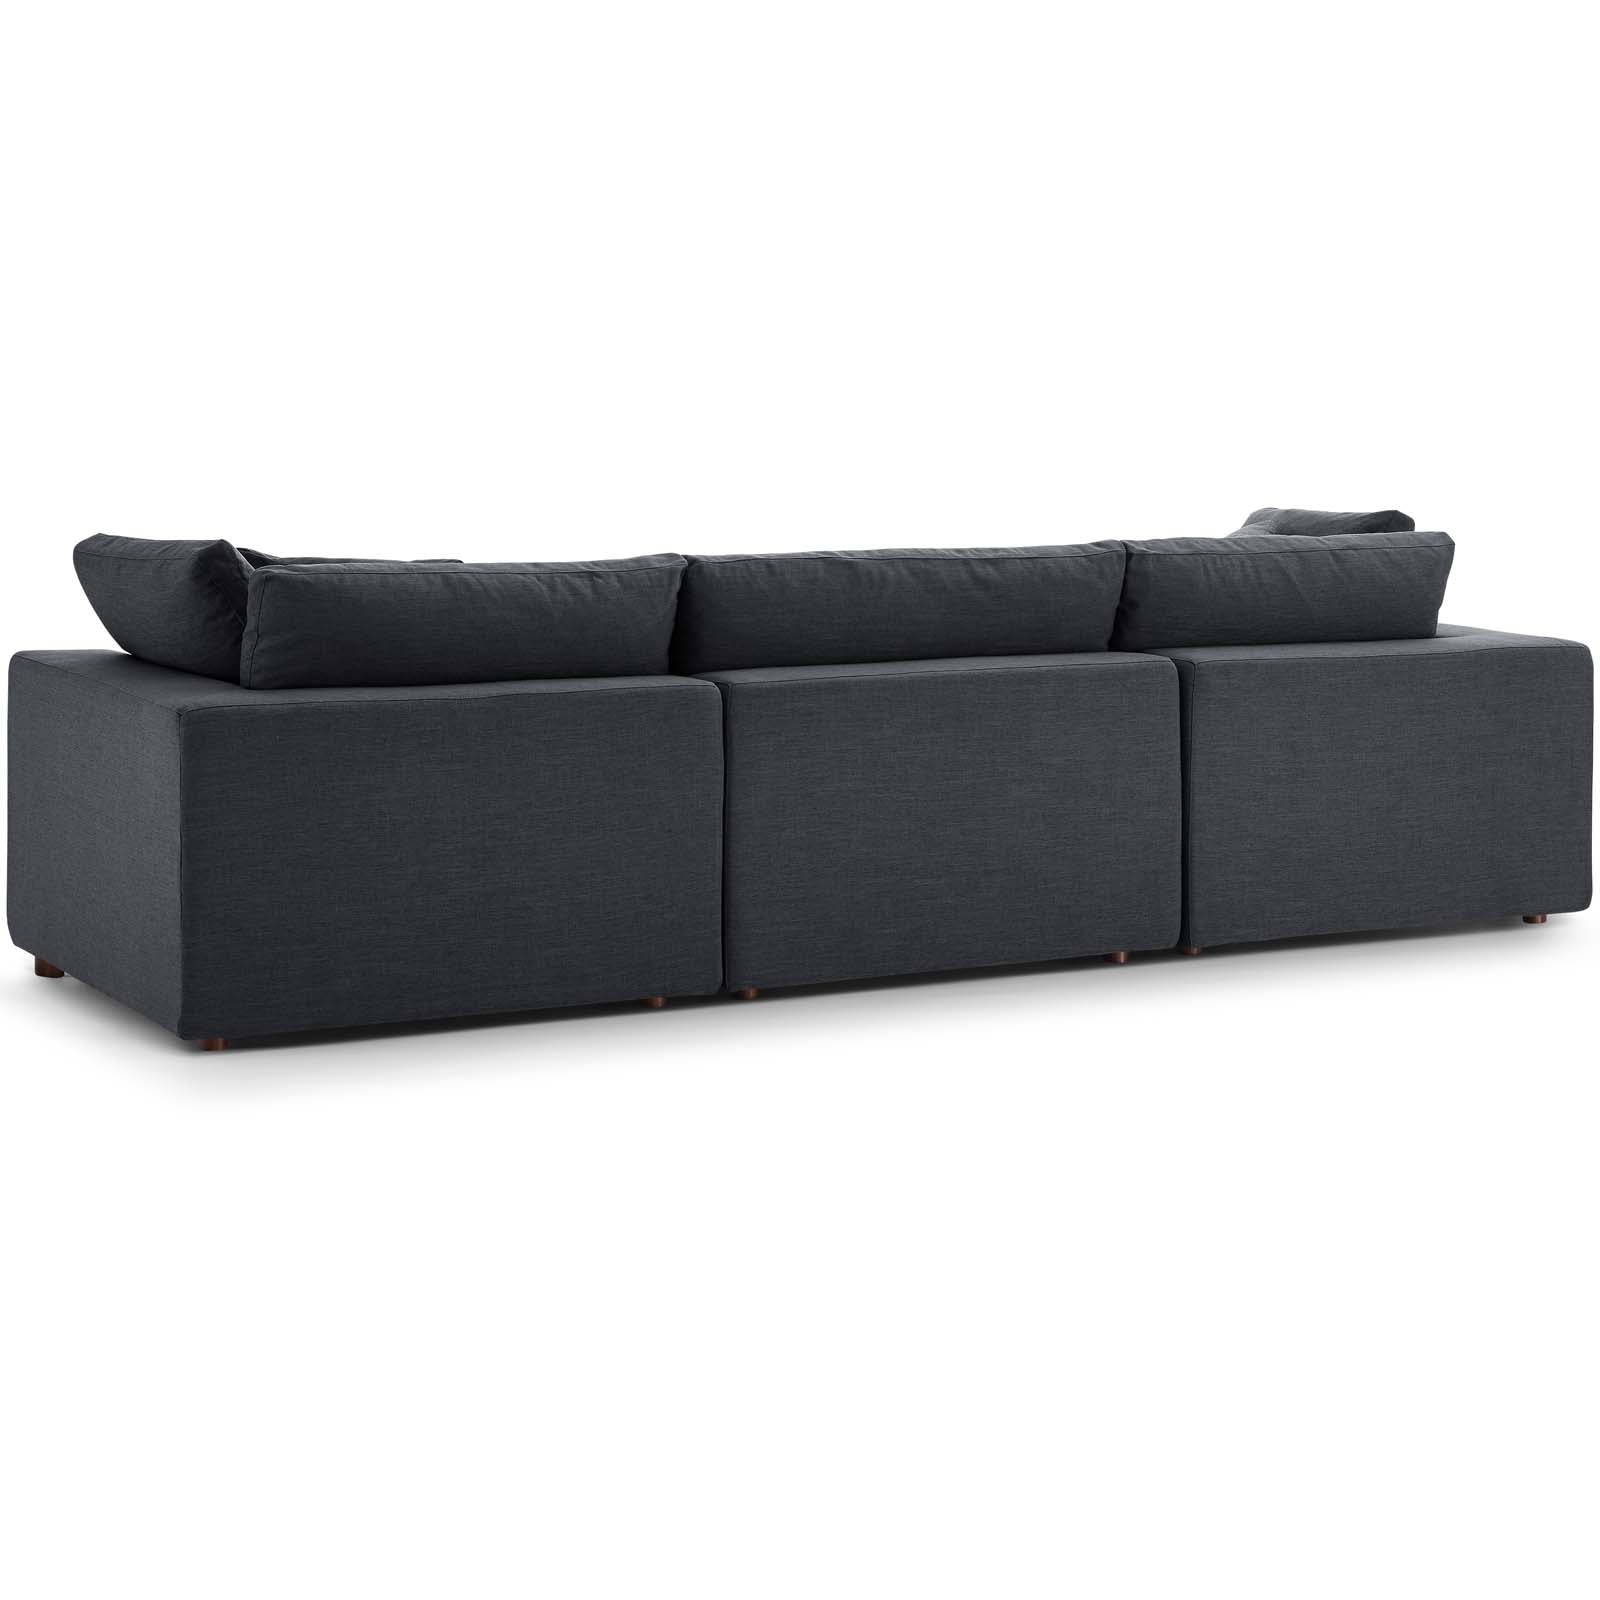 Commix Down Filled Overstuffed 3 Piece Sectional Sofa Set